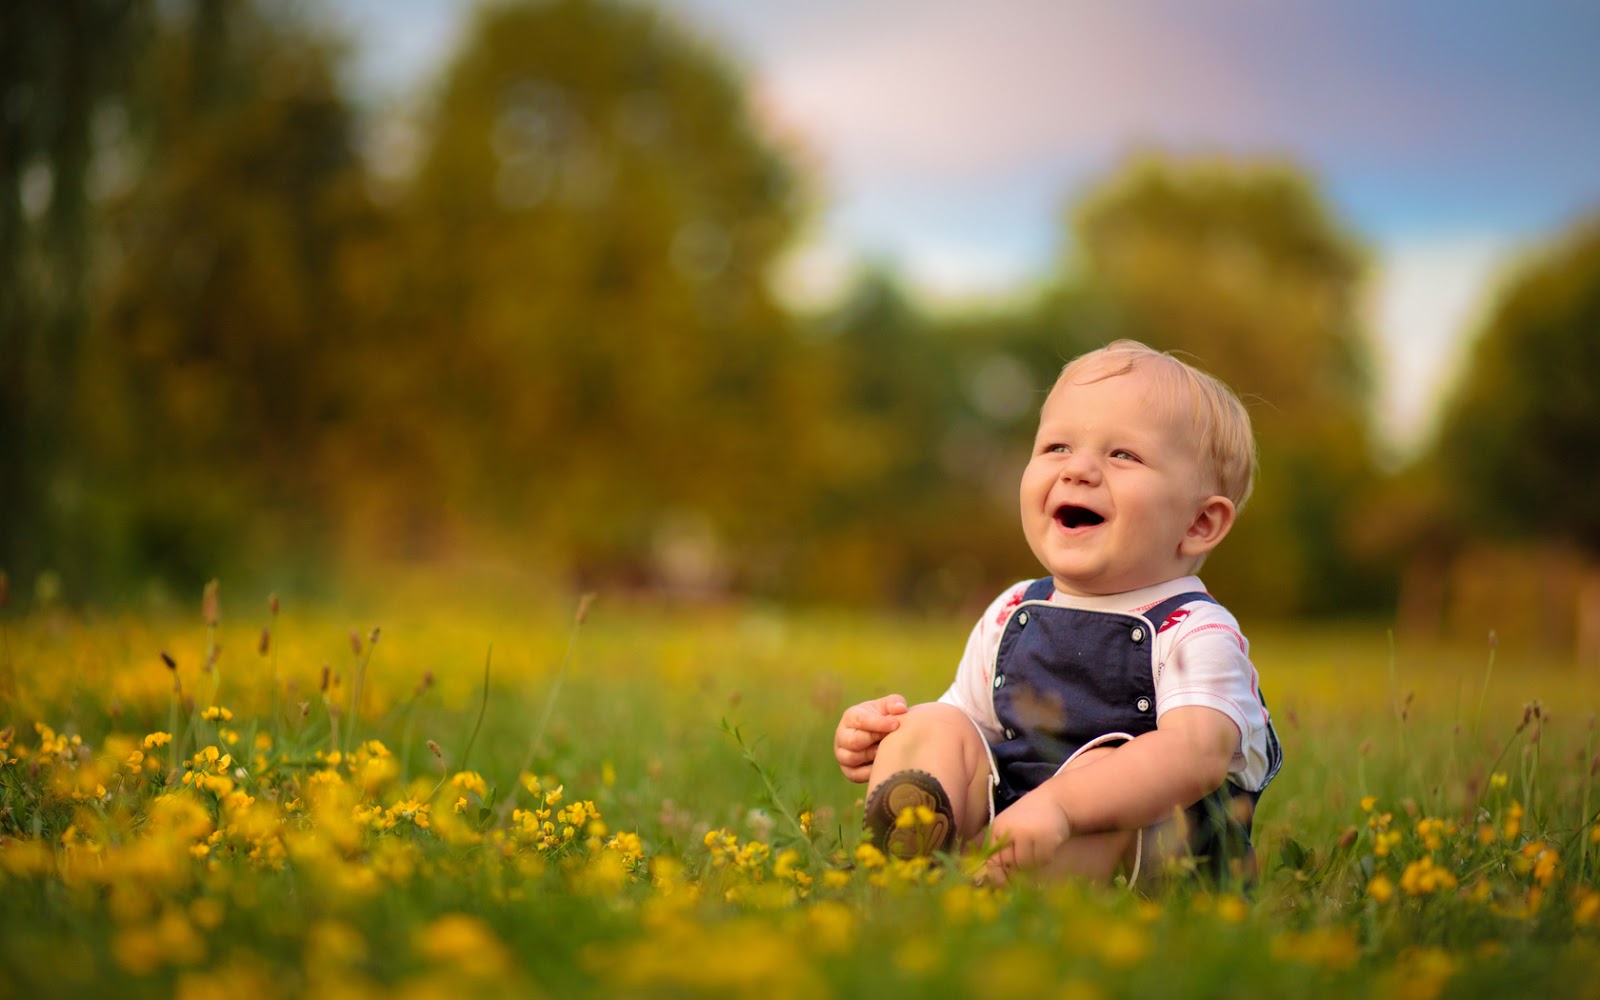 Cute Baby Smile HD Wallpaper Of Smiling Image S